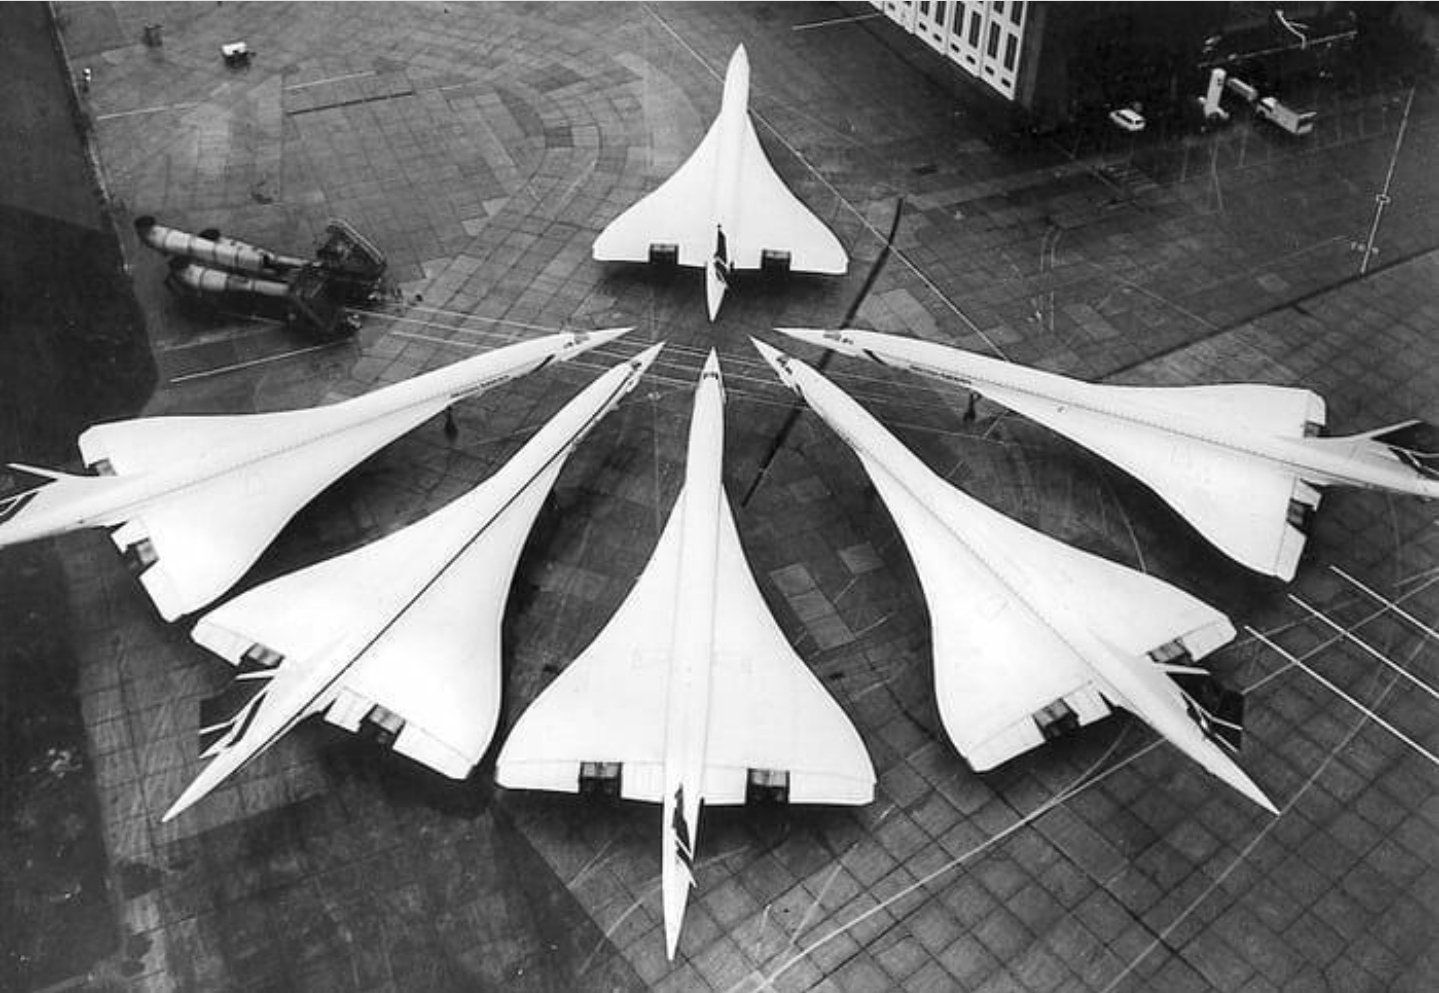 British Airways Concordes gathering to sniff the back of a freshly built one before deciding if they let it into their group. If rejected, it has to go to Air France, 1986